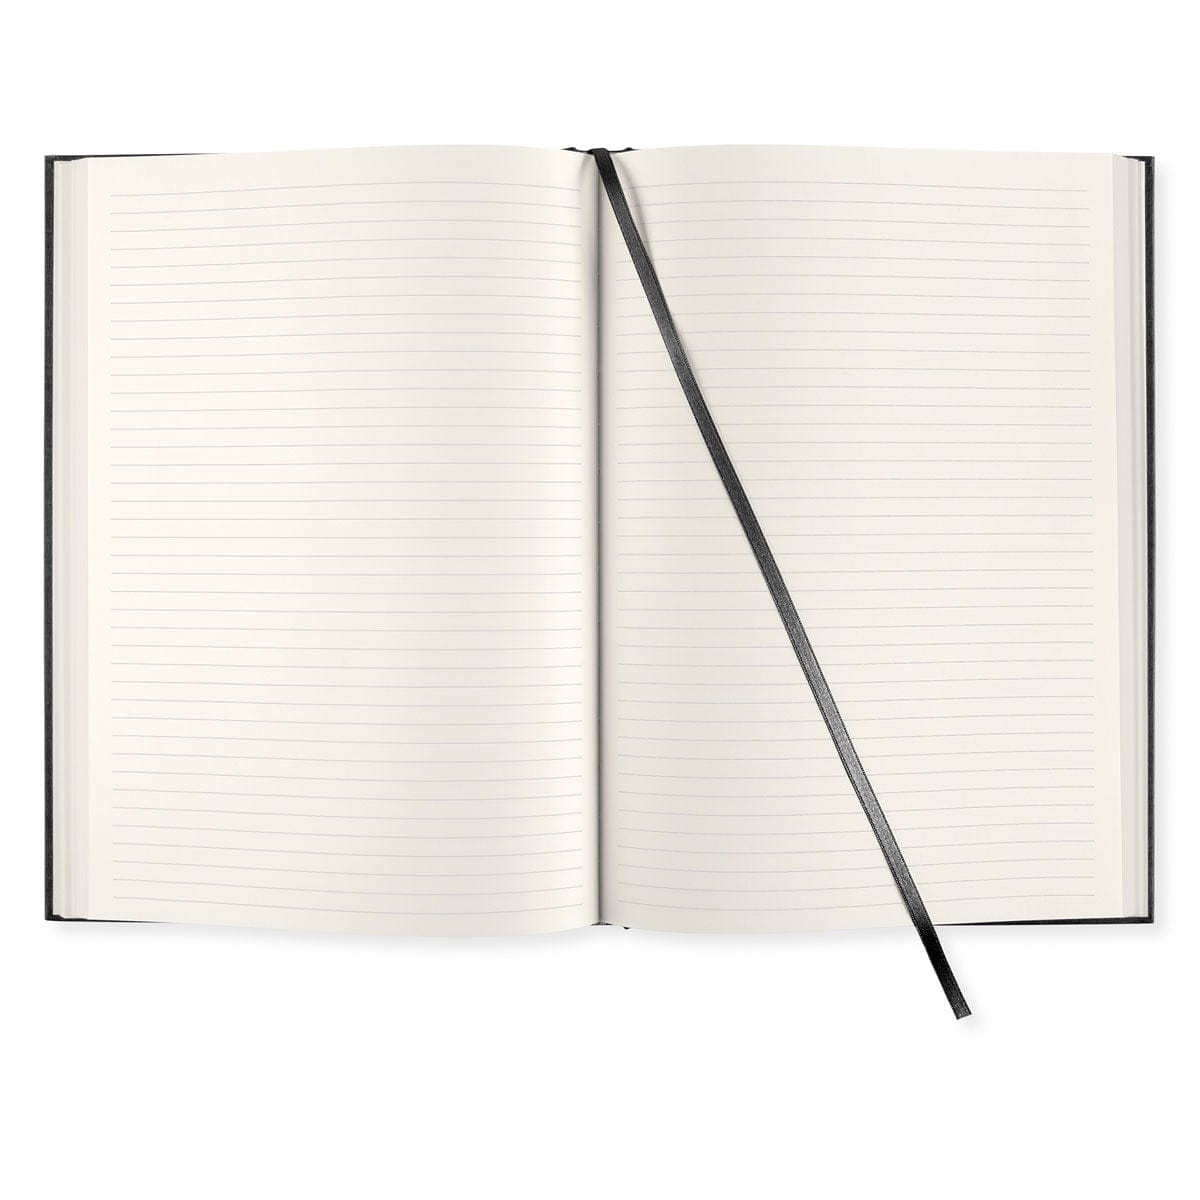 PaperStyle Paperstyle NOTEBOOK A5 256p. Ruled Tea Rose